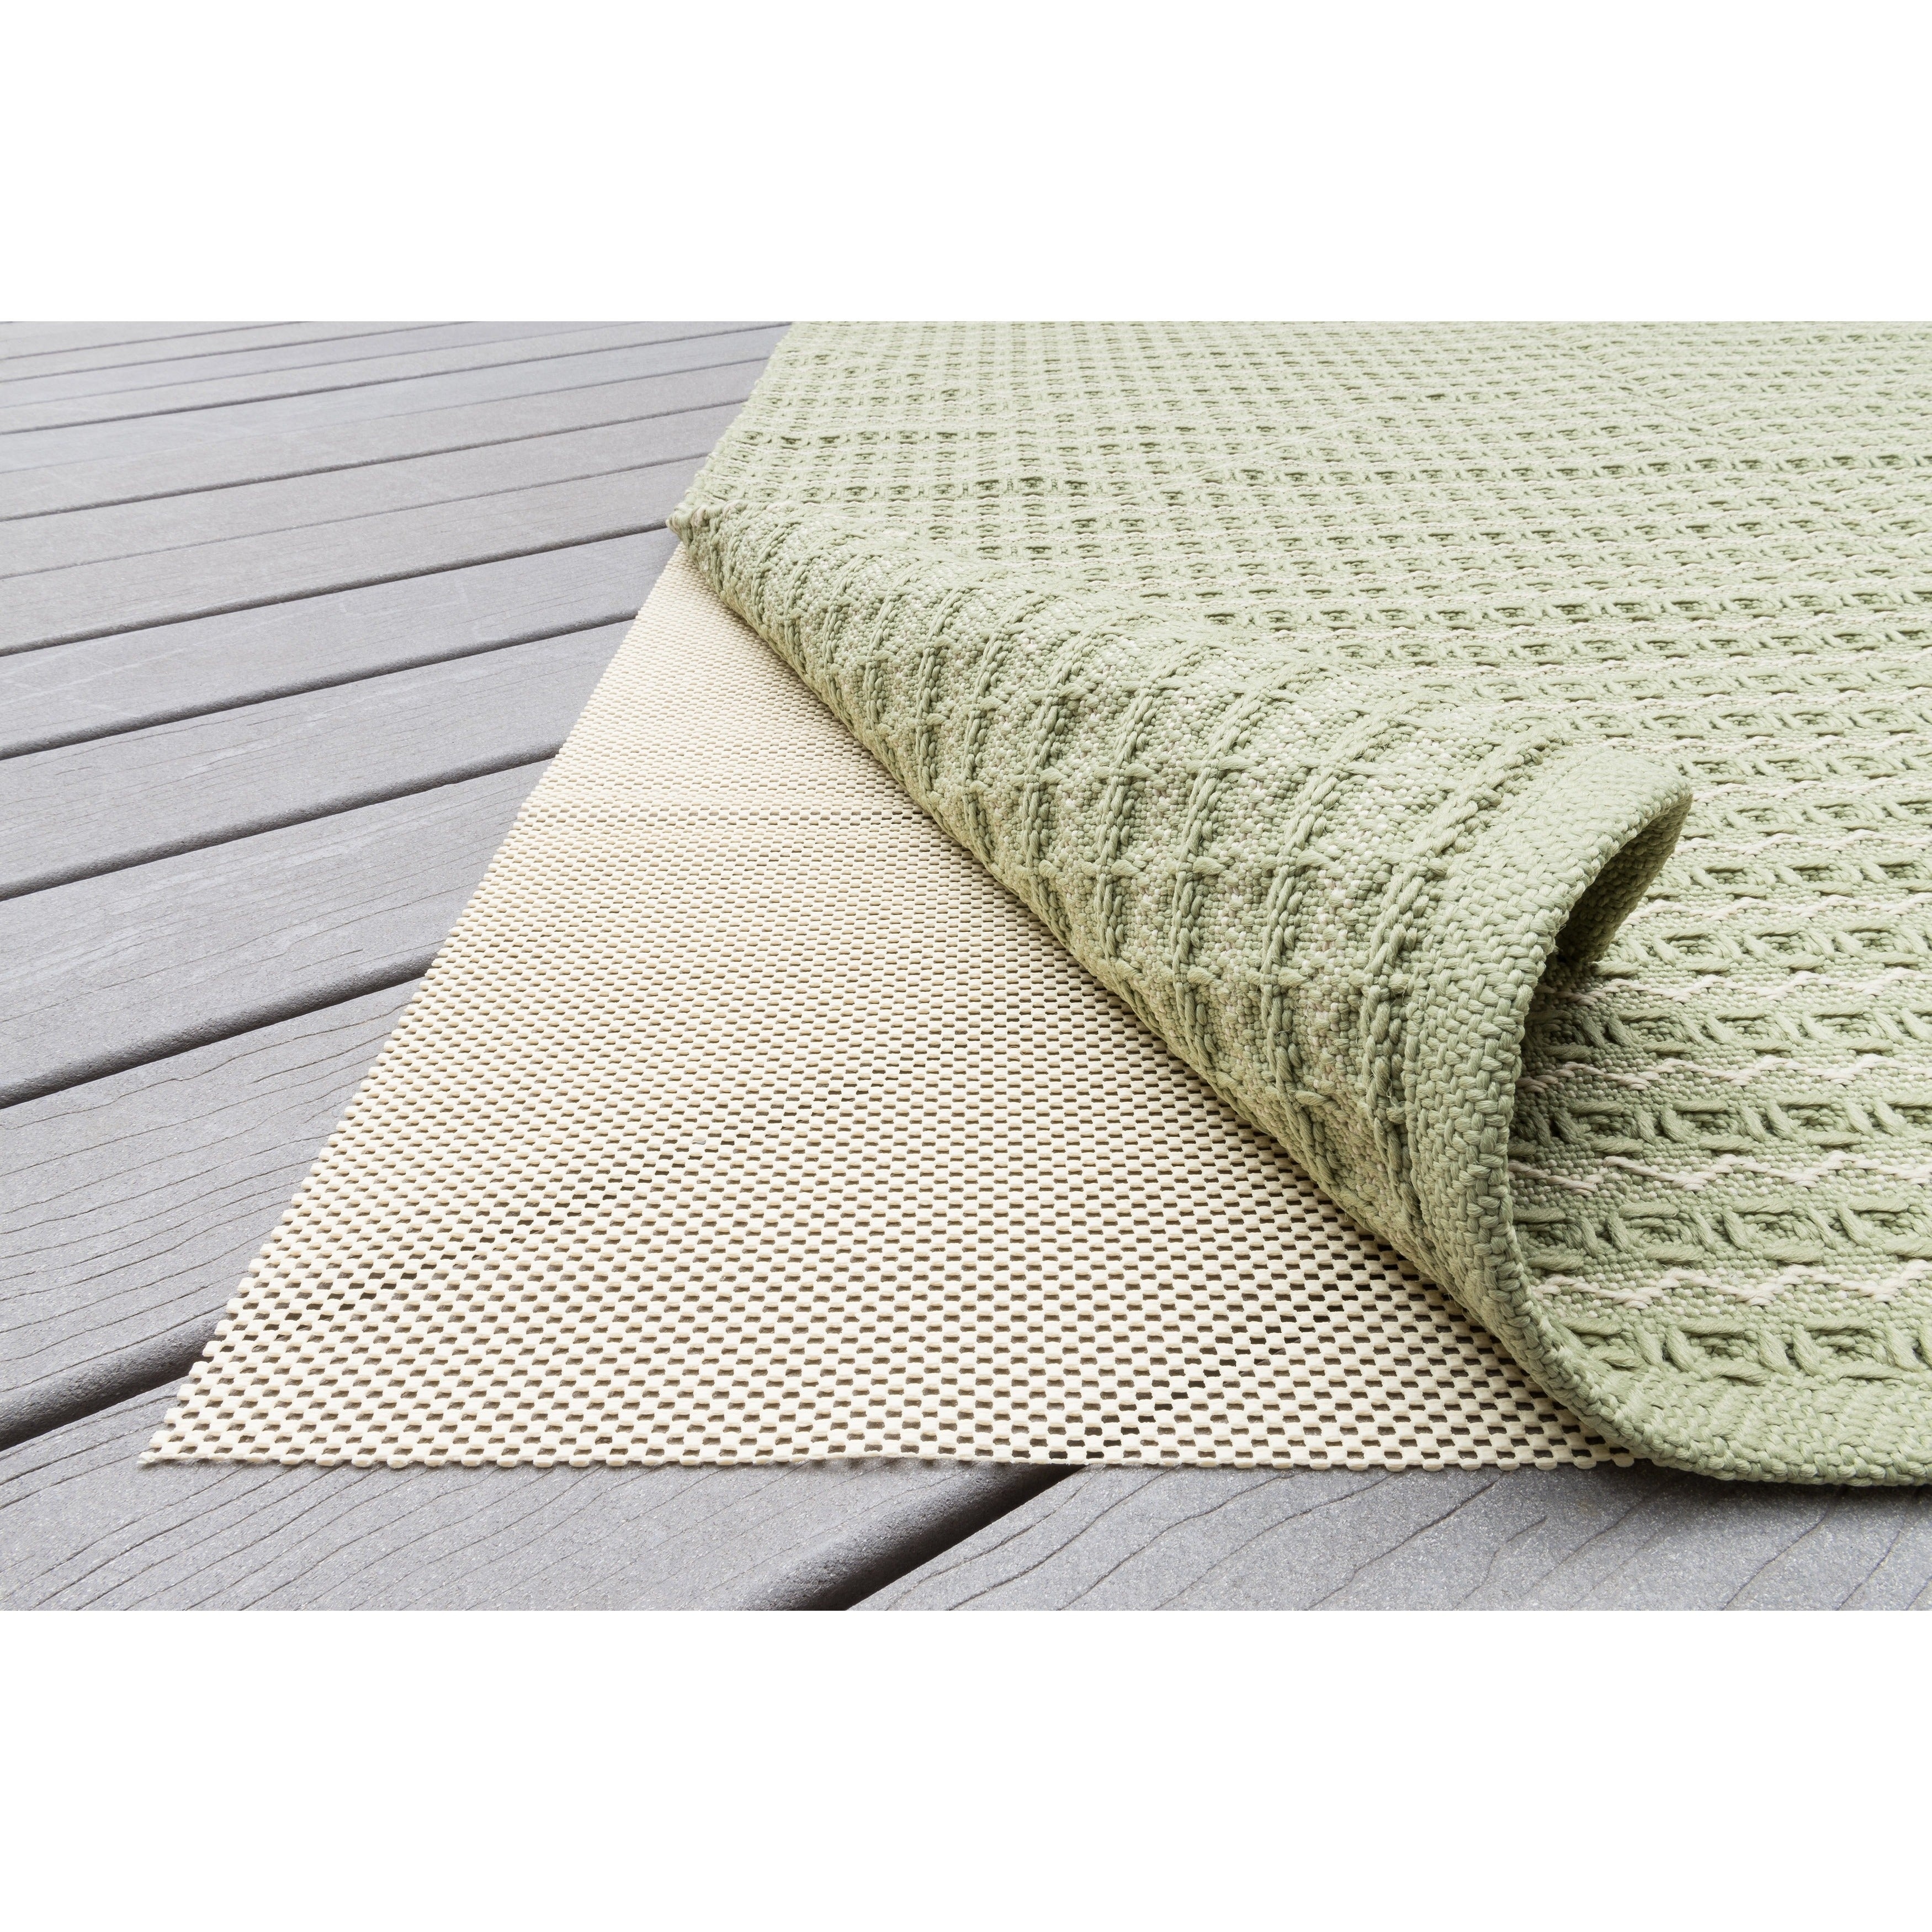 https://ak1.ostkcdn.com/images/products/is/images/direct/be8237a51b47cdd5191d0d913feebb3d42879443/Alexander-Home-Outdoor-Non-slip-Rug-Pad.jpg